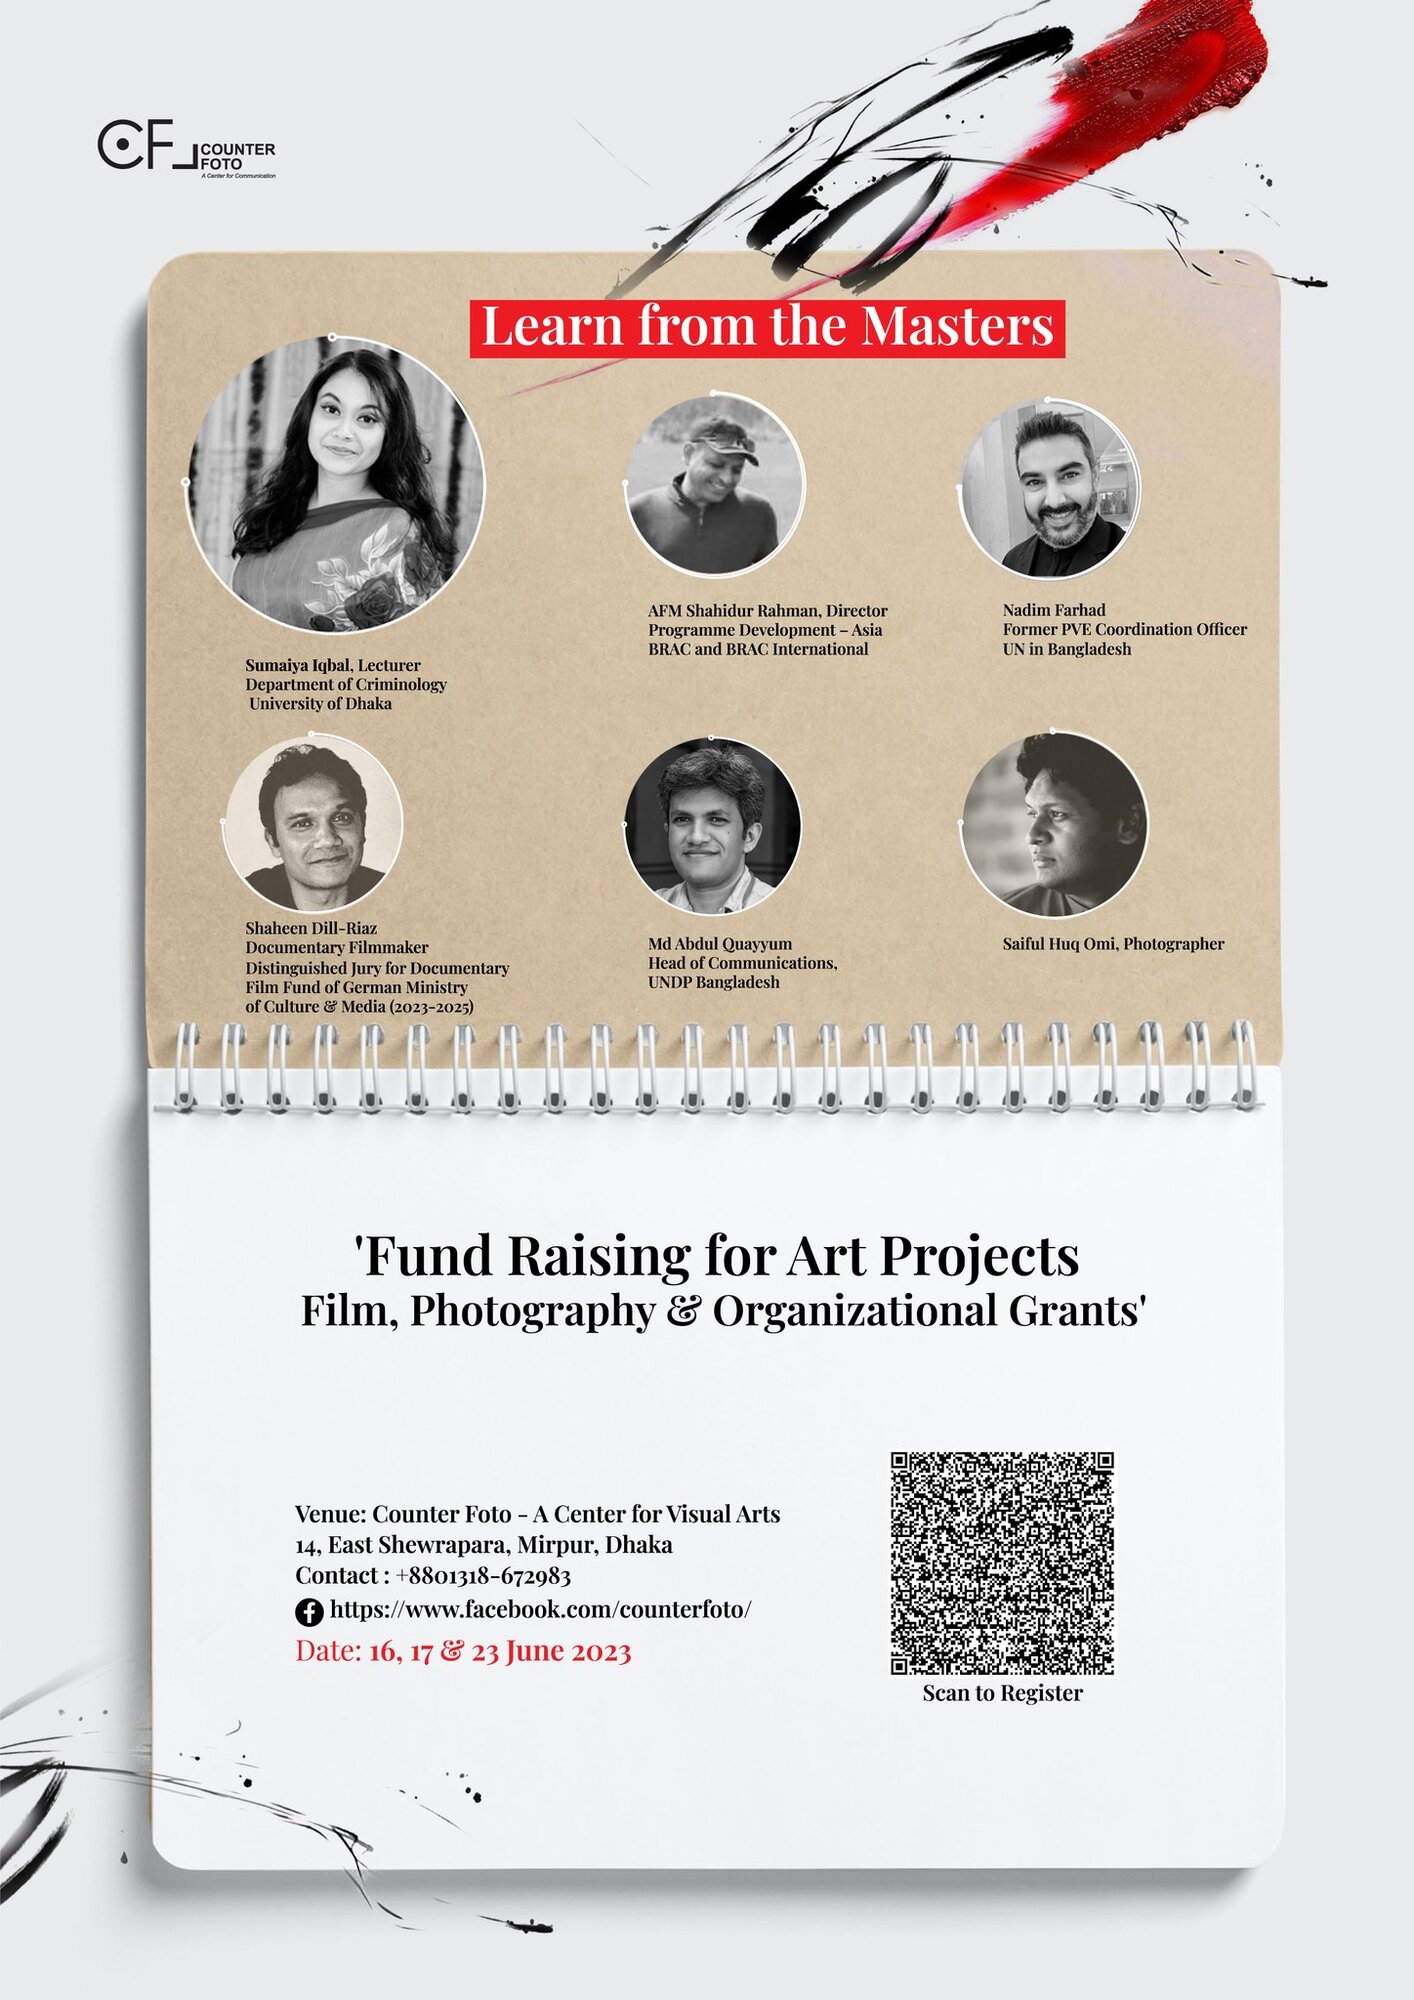 Fund Raising for Art Projects Workshop (Film, Photography and Organizational Grants)